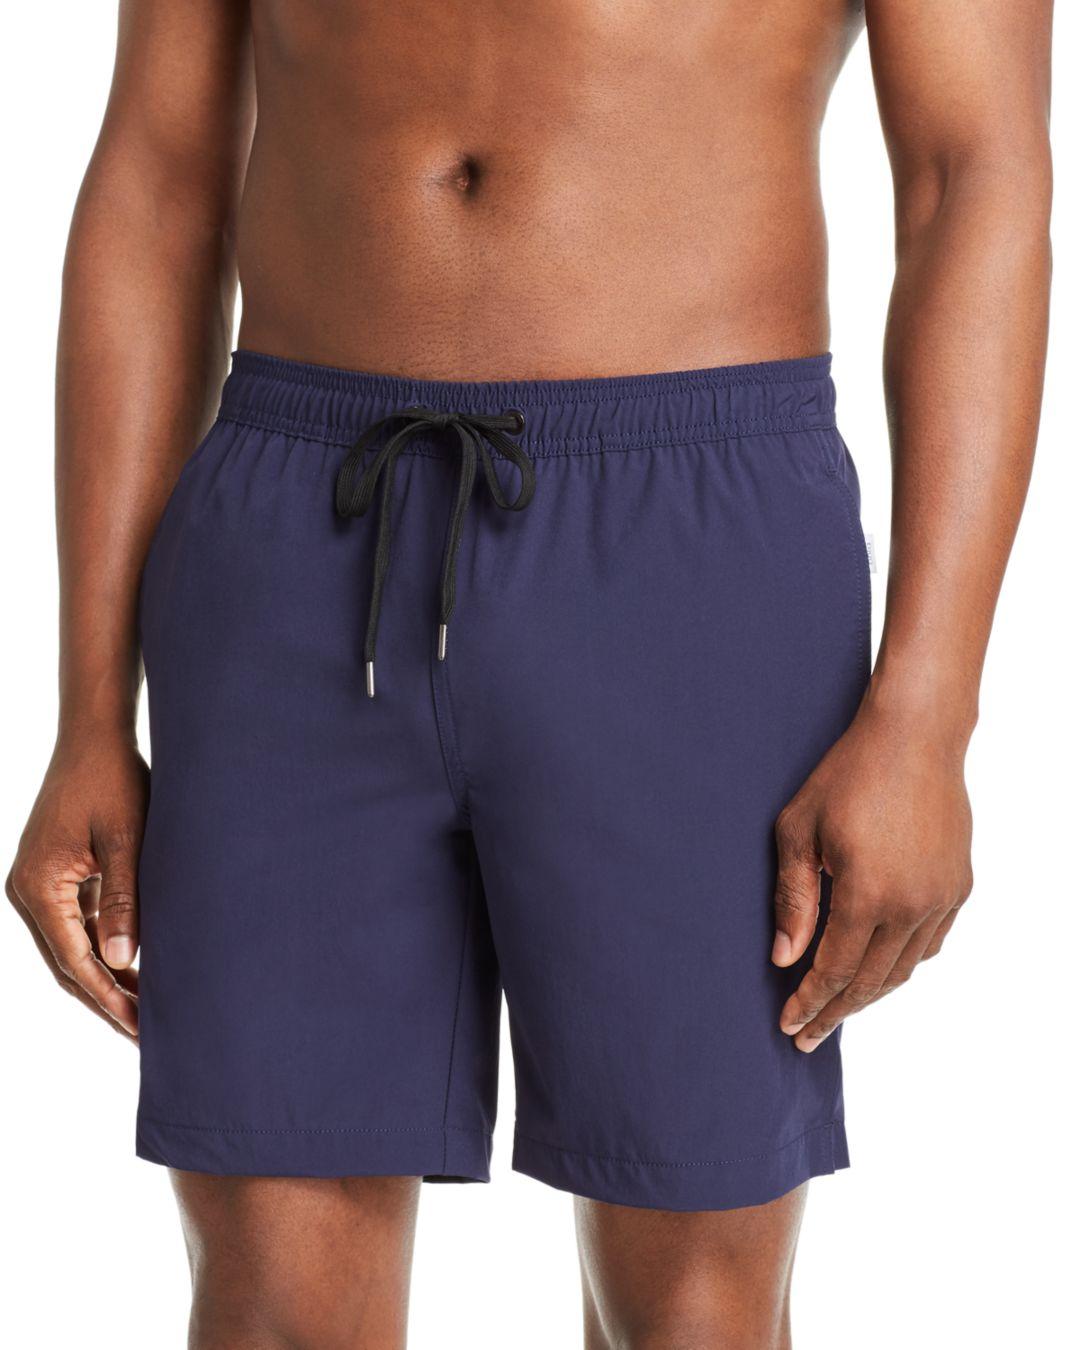 Onia Synthetic Charles Swim Trunks in Deep Navy (Blue) for Men - Lyst